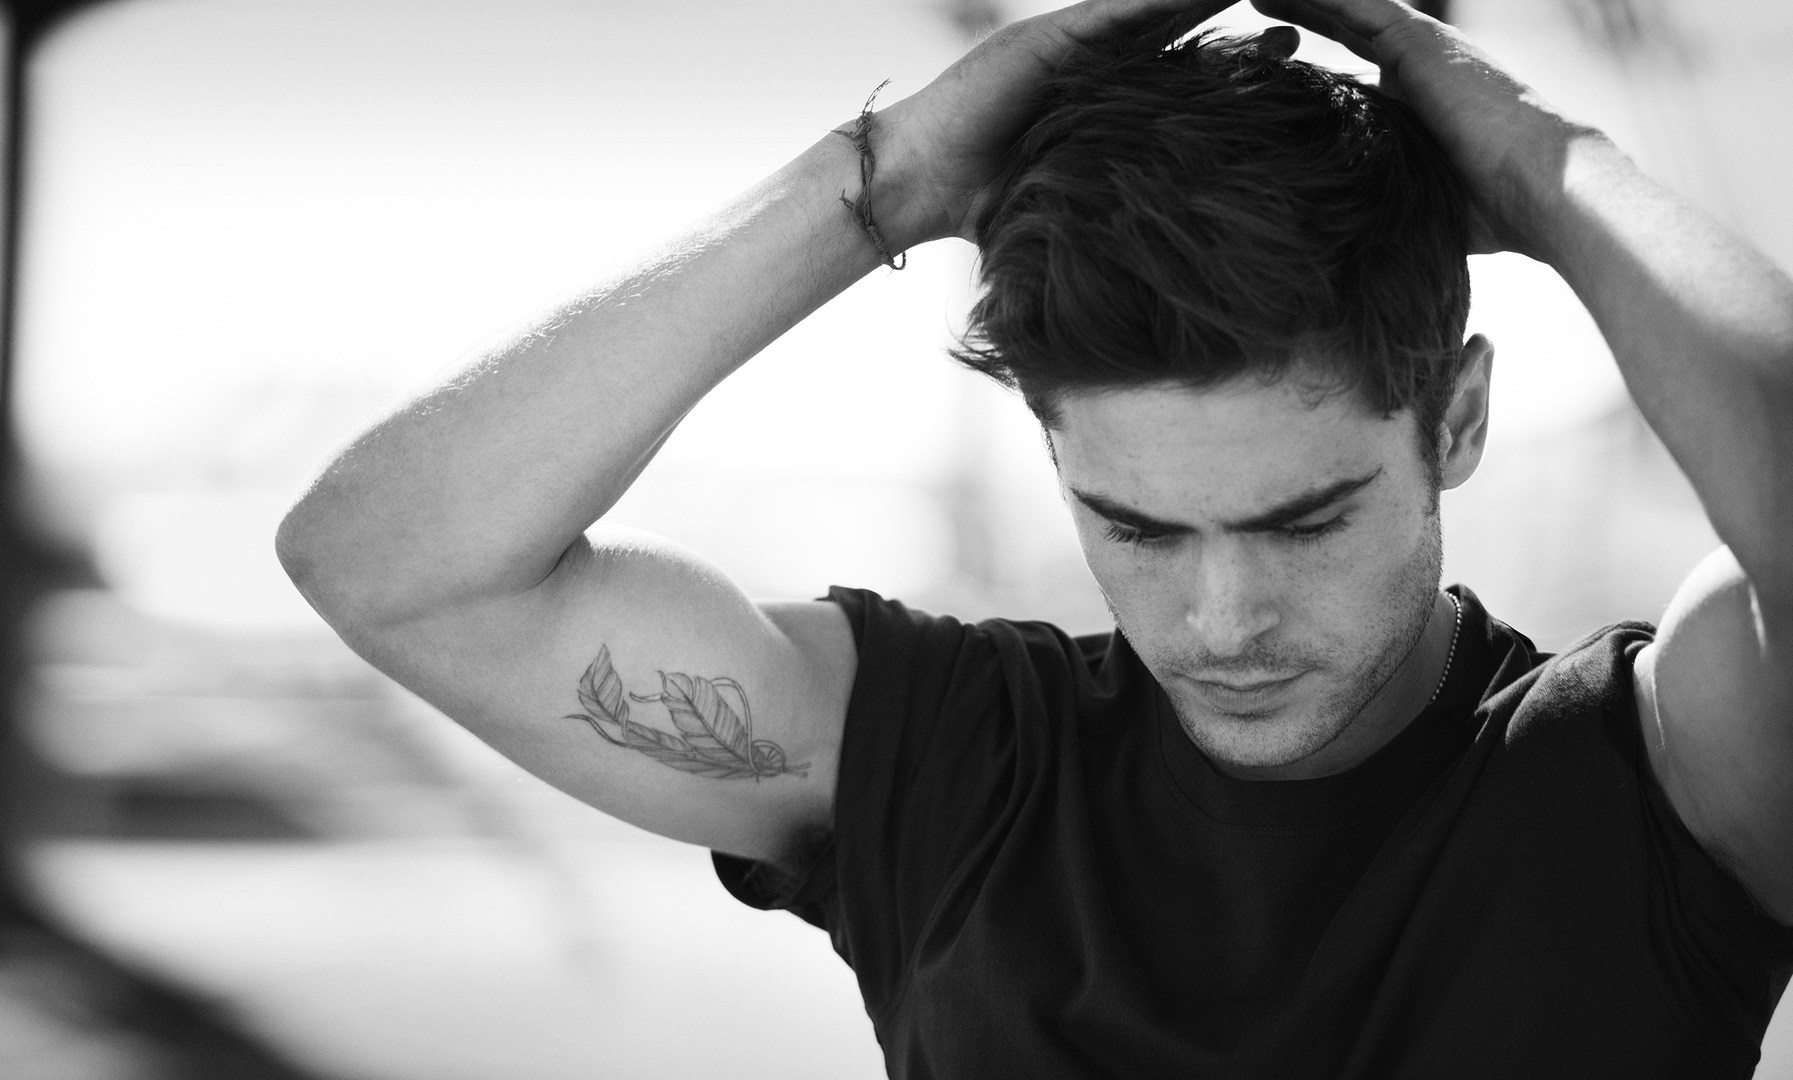 Awesome Zac Efron Wallpaper Full HD Pictures